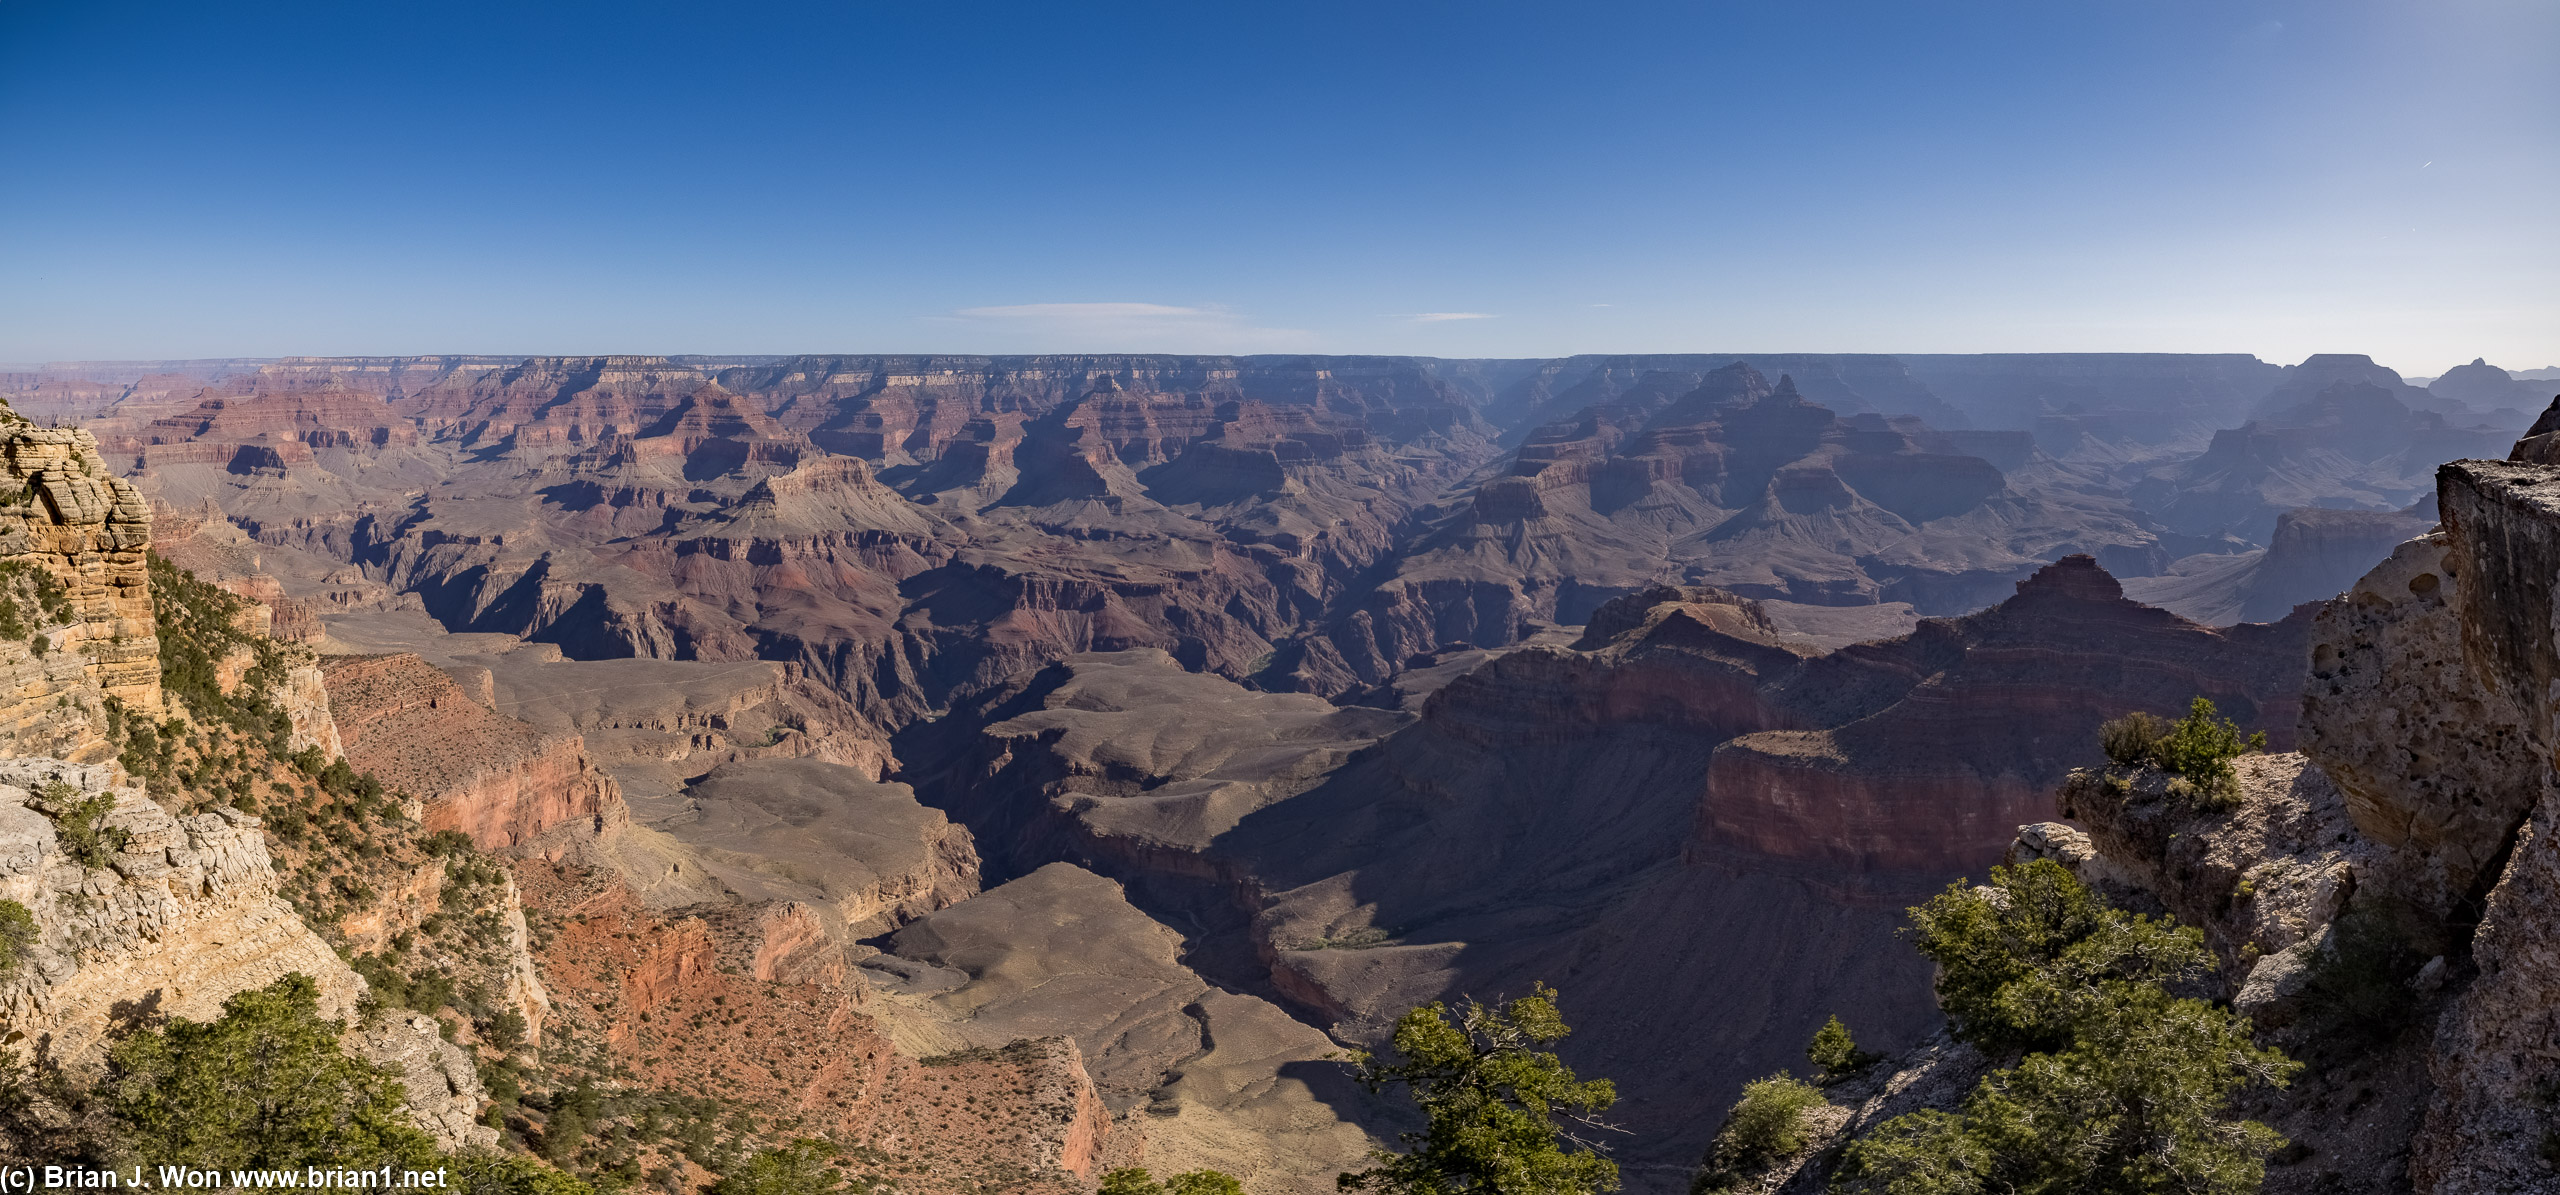 Mather Point is well known for a reason.